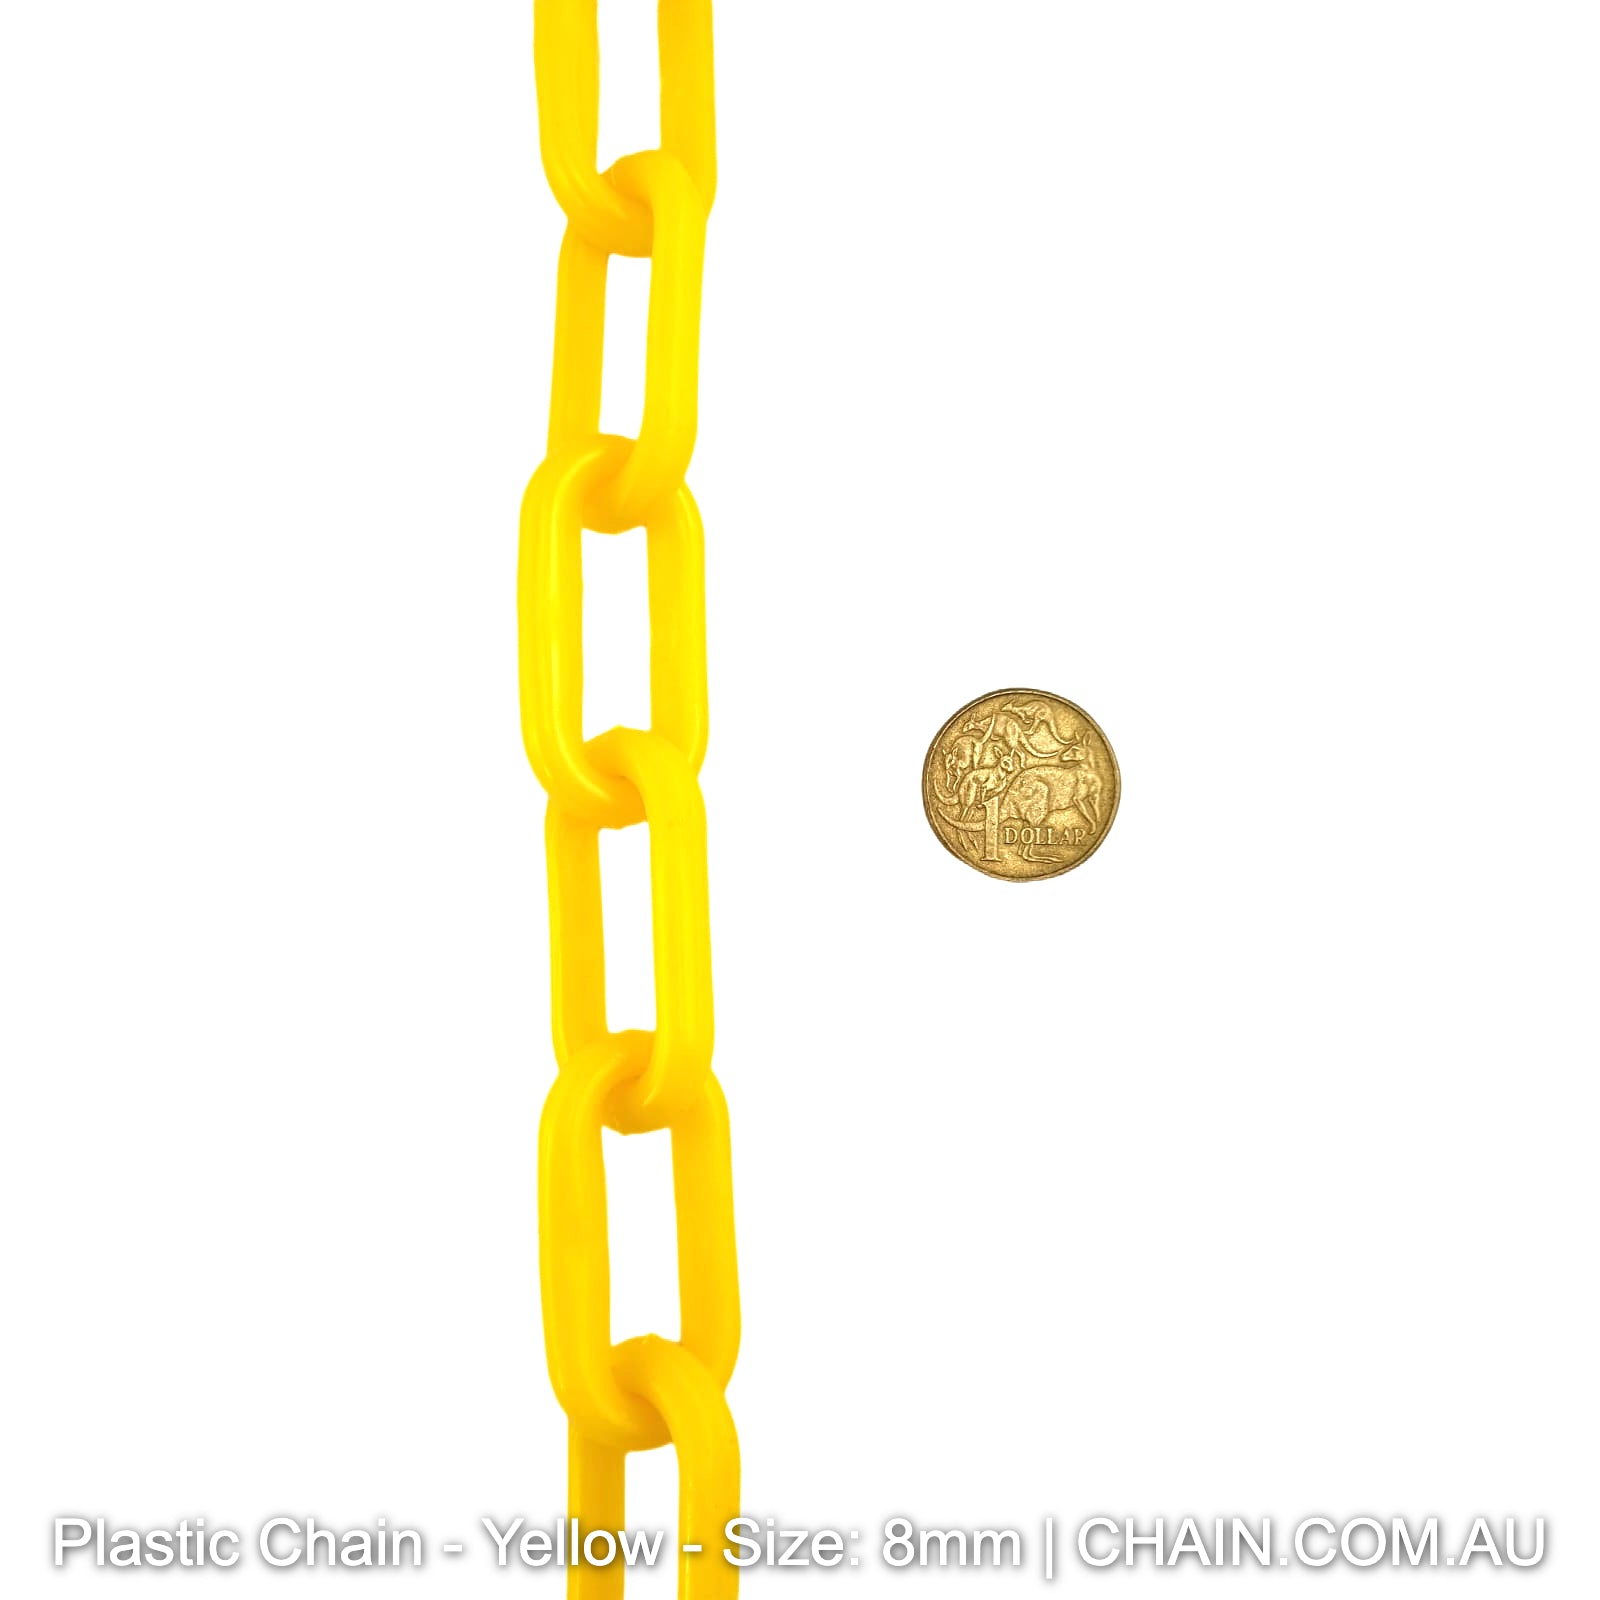 Yellow Plastic Chain, size: 8mm. Chain by the metre or bulk buy larger reels. Australia wide shipping + Melbourne pick up. Shop: Chain.com.au